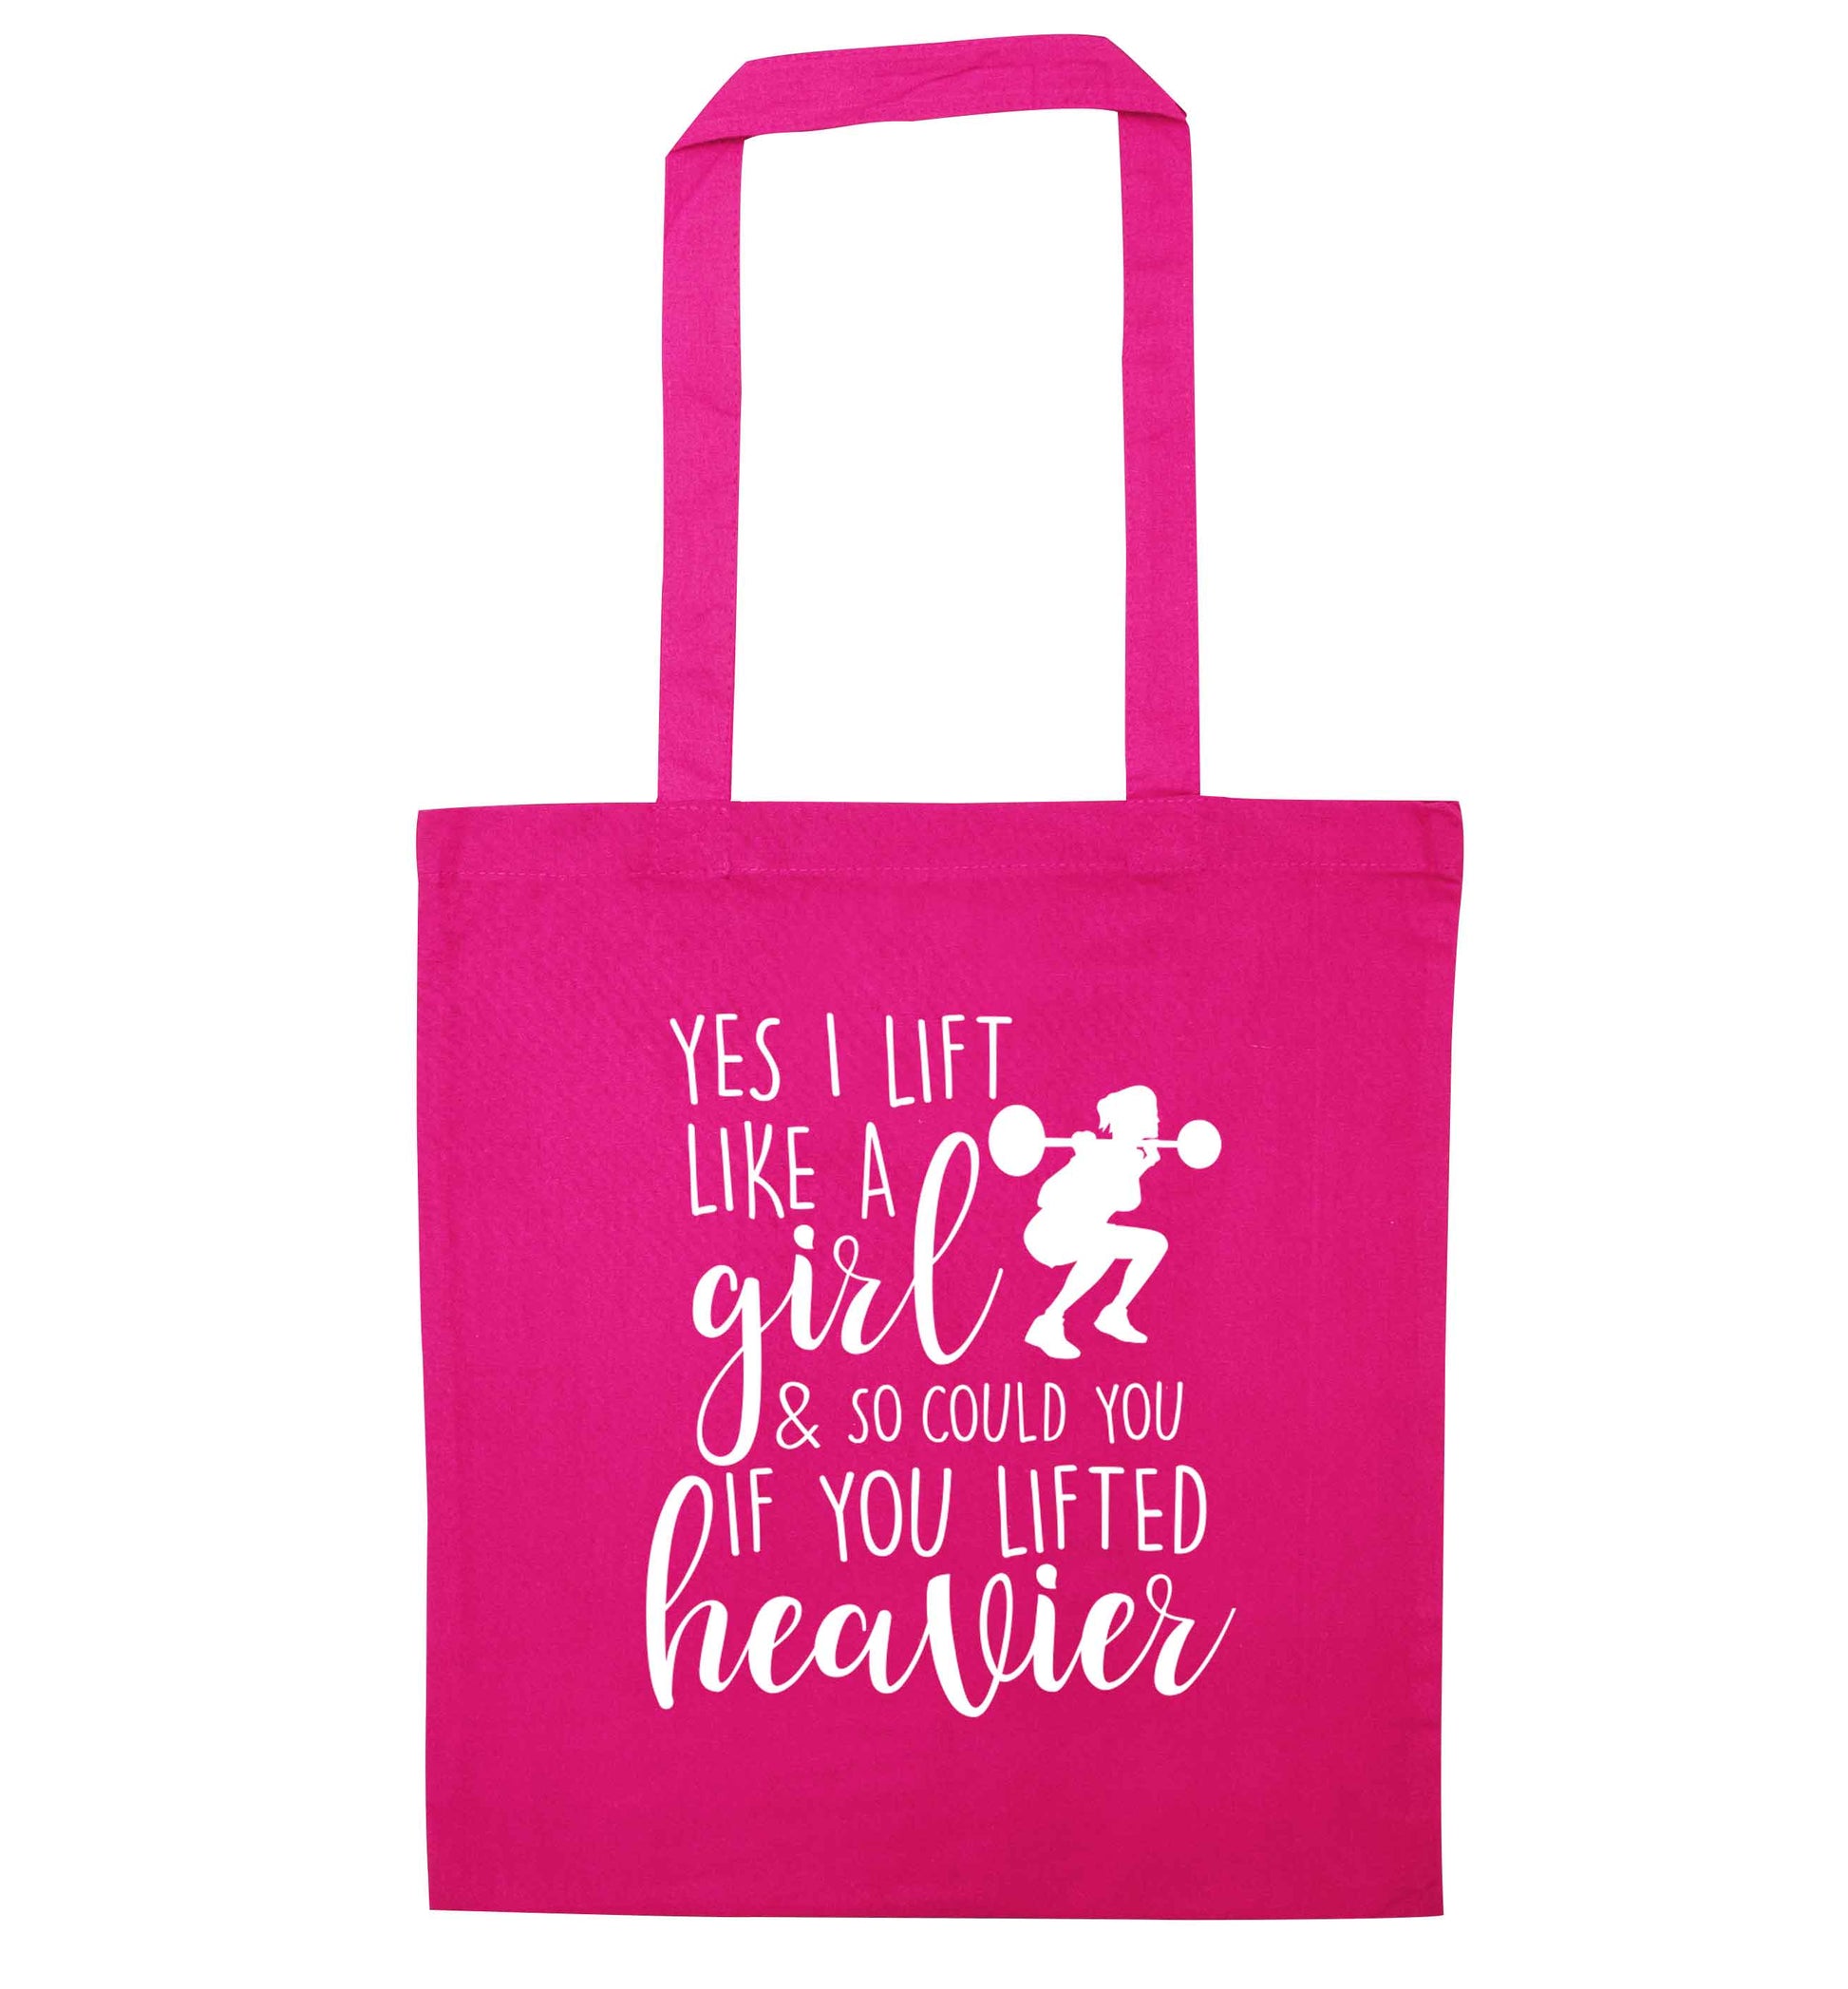 Yes I lift like a girl and so could you if you lifted heavier pink tote bag